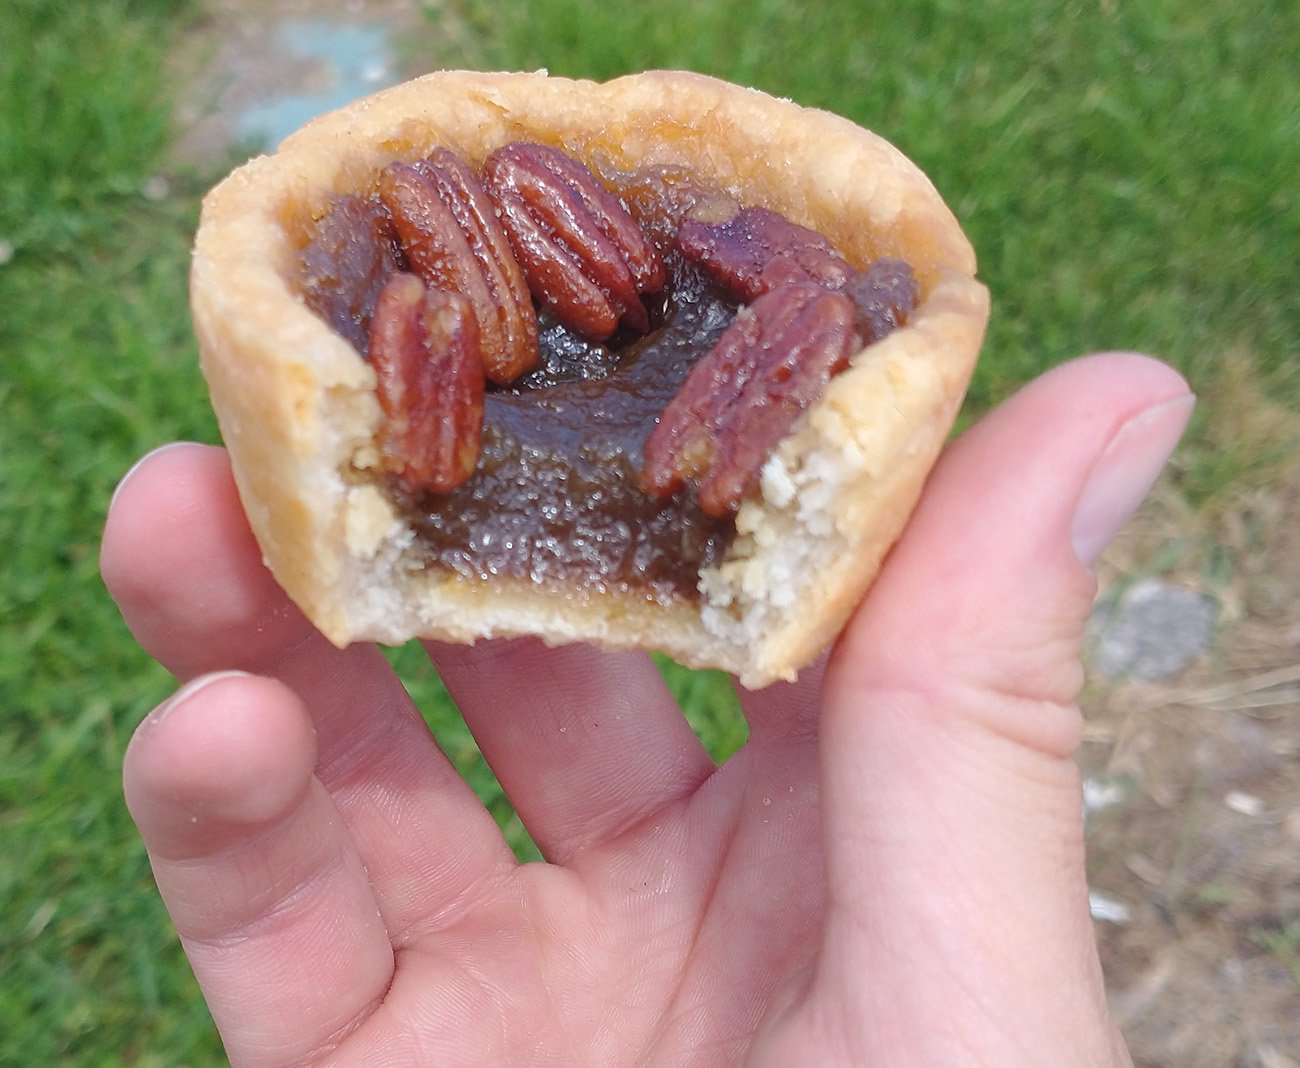 Apparently butter tarts are a Canadian thing. They are just mini pecan pies, usually without the pecans. 